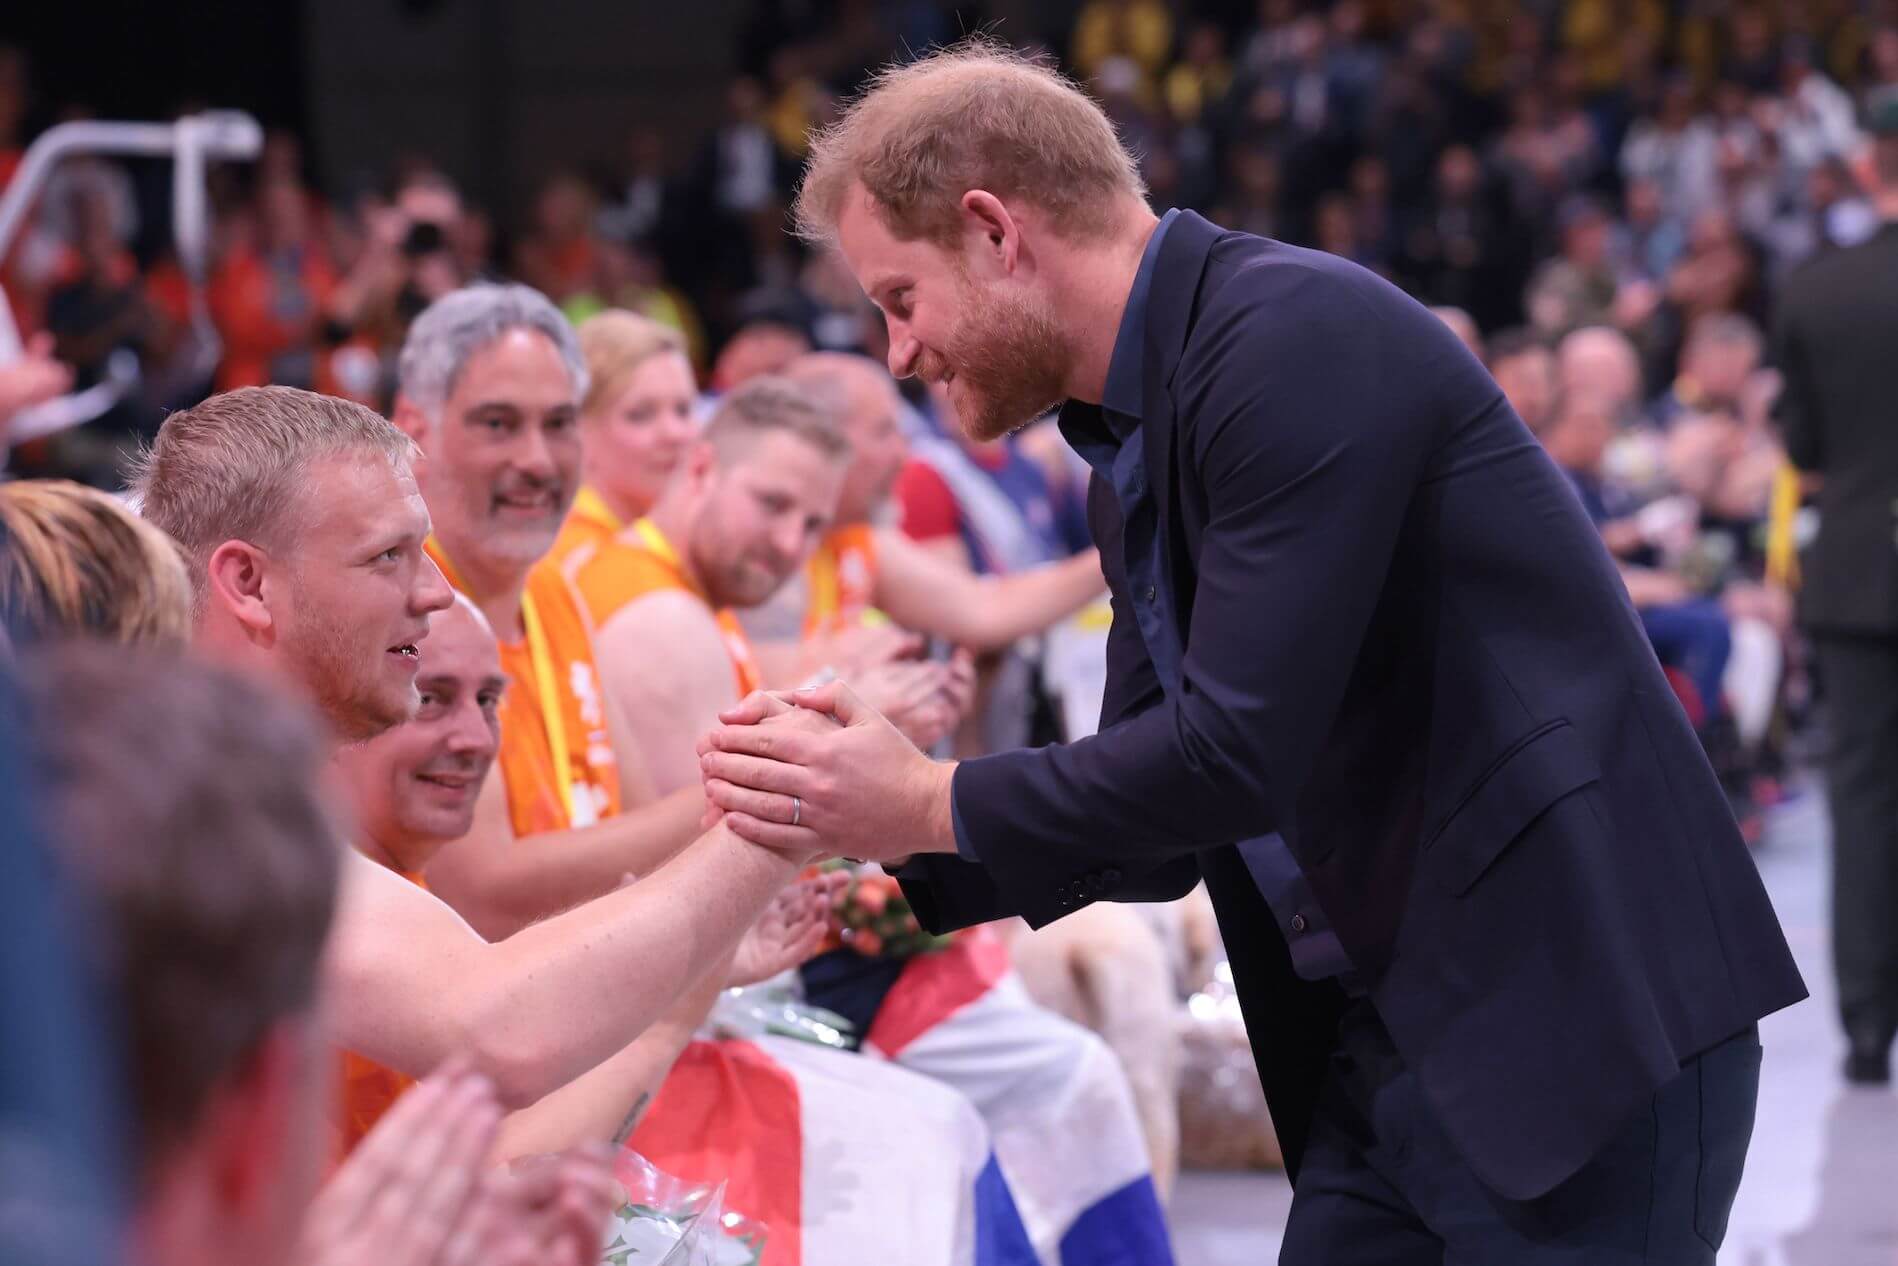 Prince Harry holding the hand of a competitor in the 2020 Invictus Games in the Netherlands